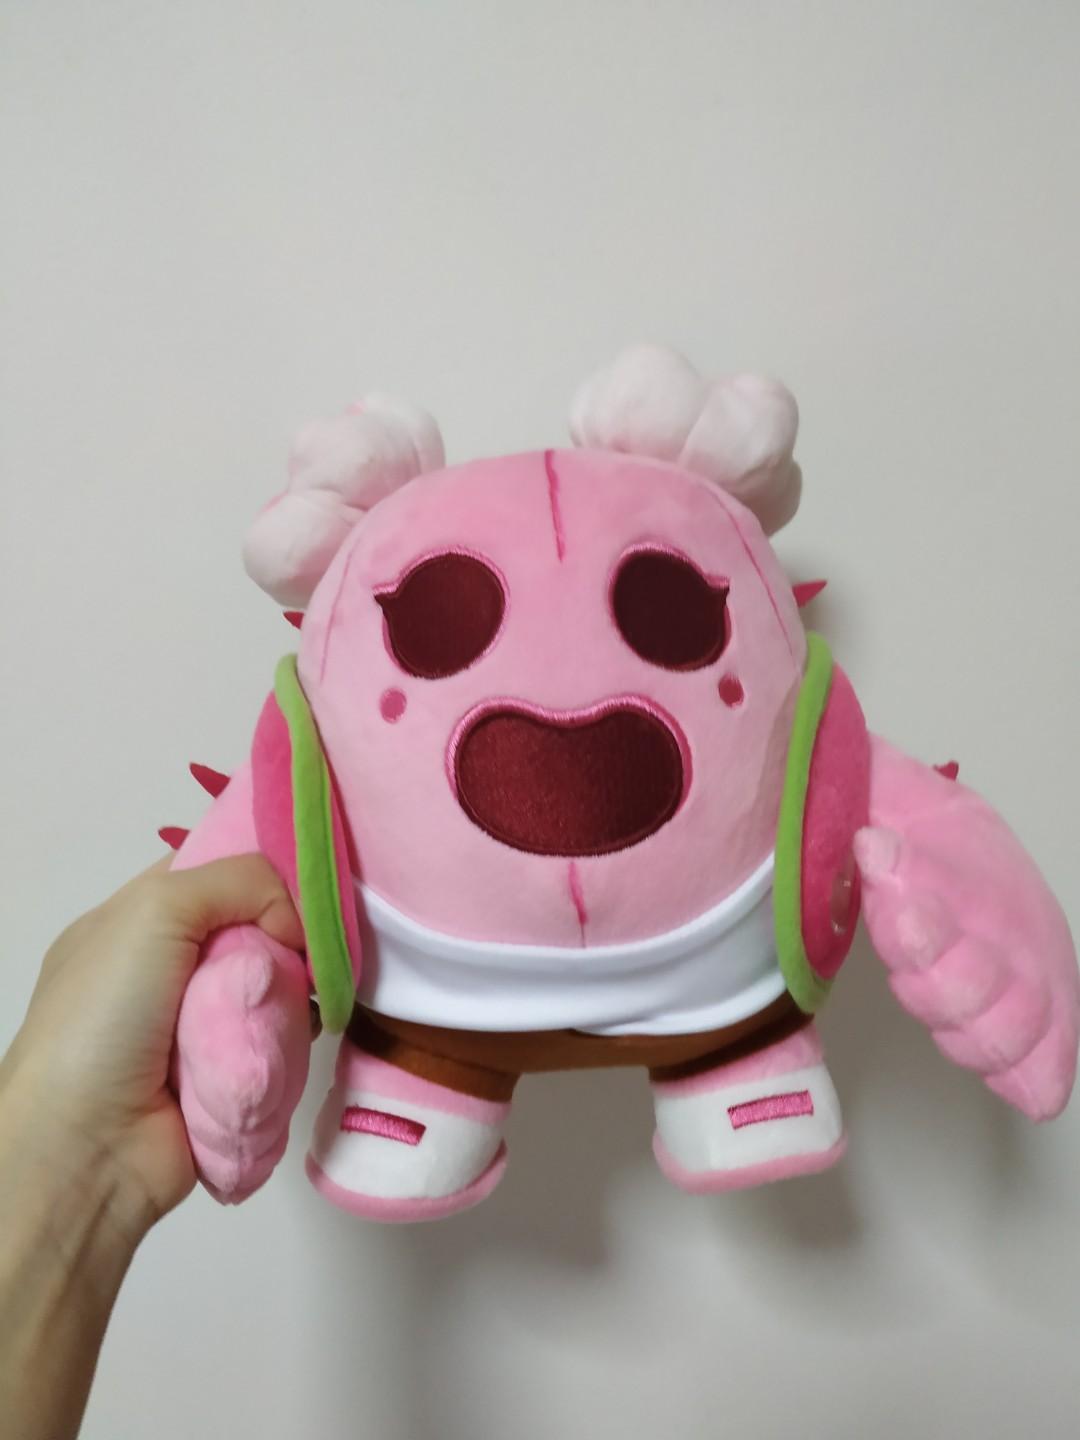 Supercell Official Brawl Stars Sakura Spike Plushie Toys Games Stuffed Toys On Carousell